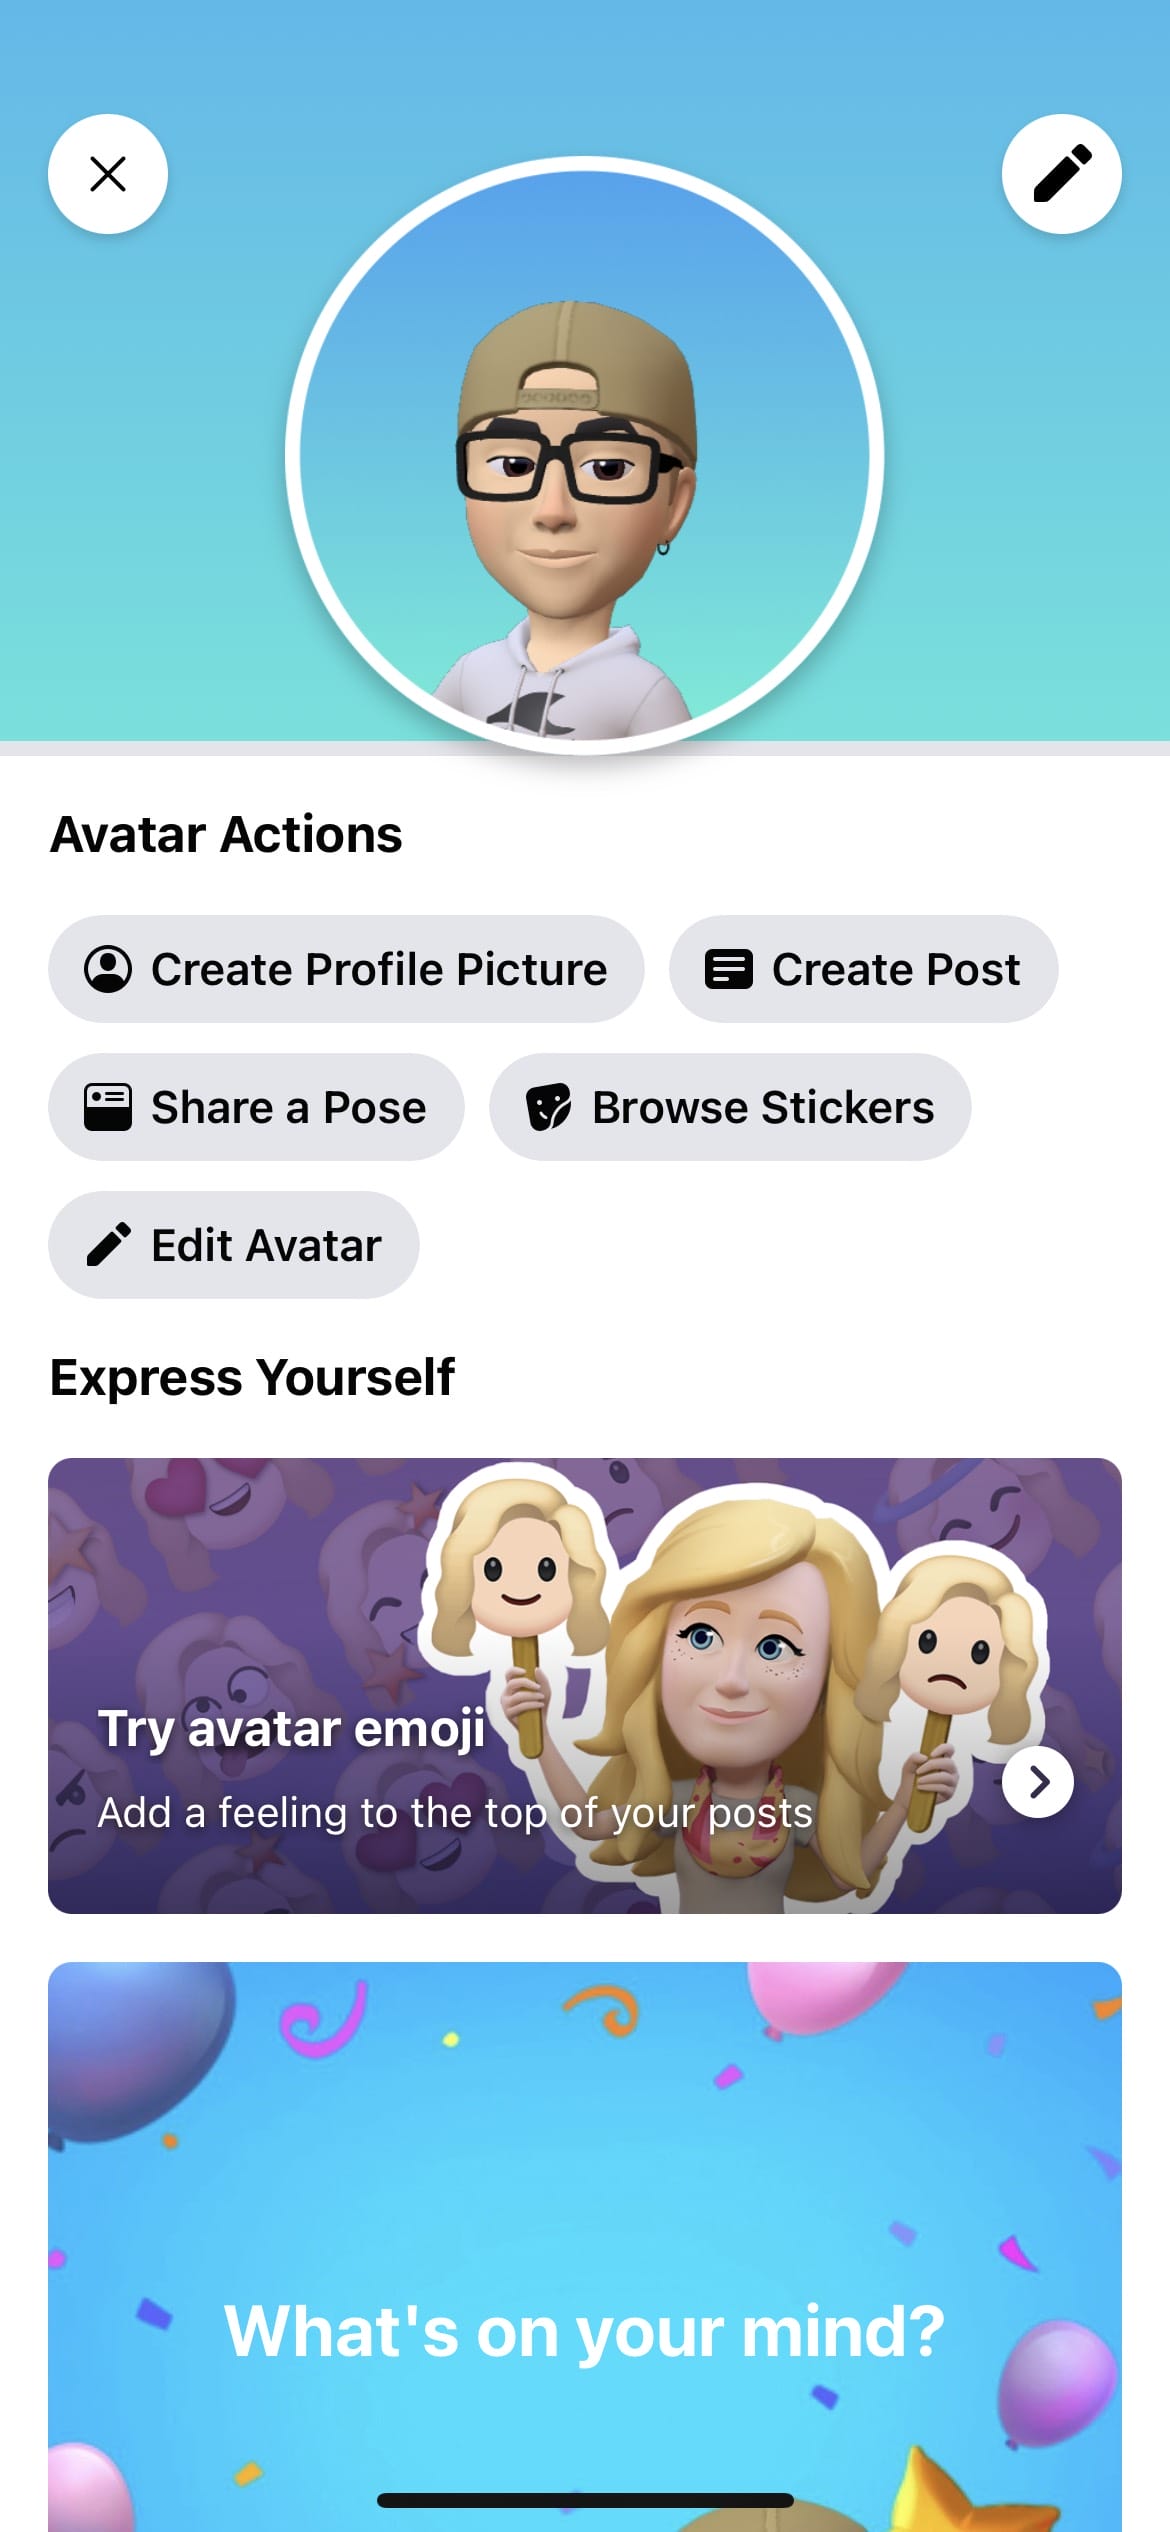 How to set avatar as Facebook profile picture